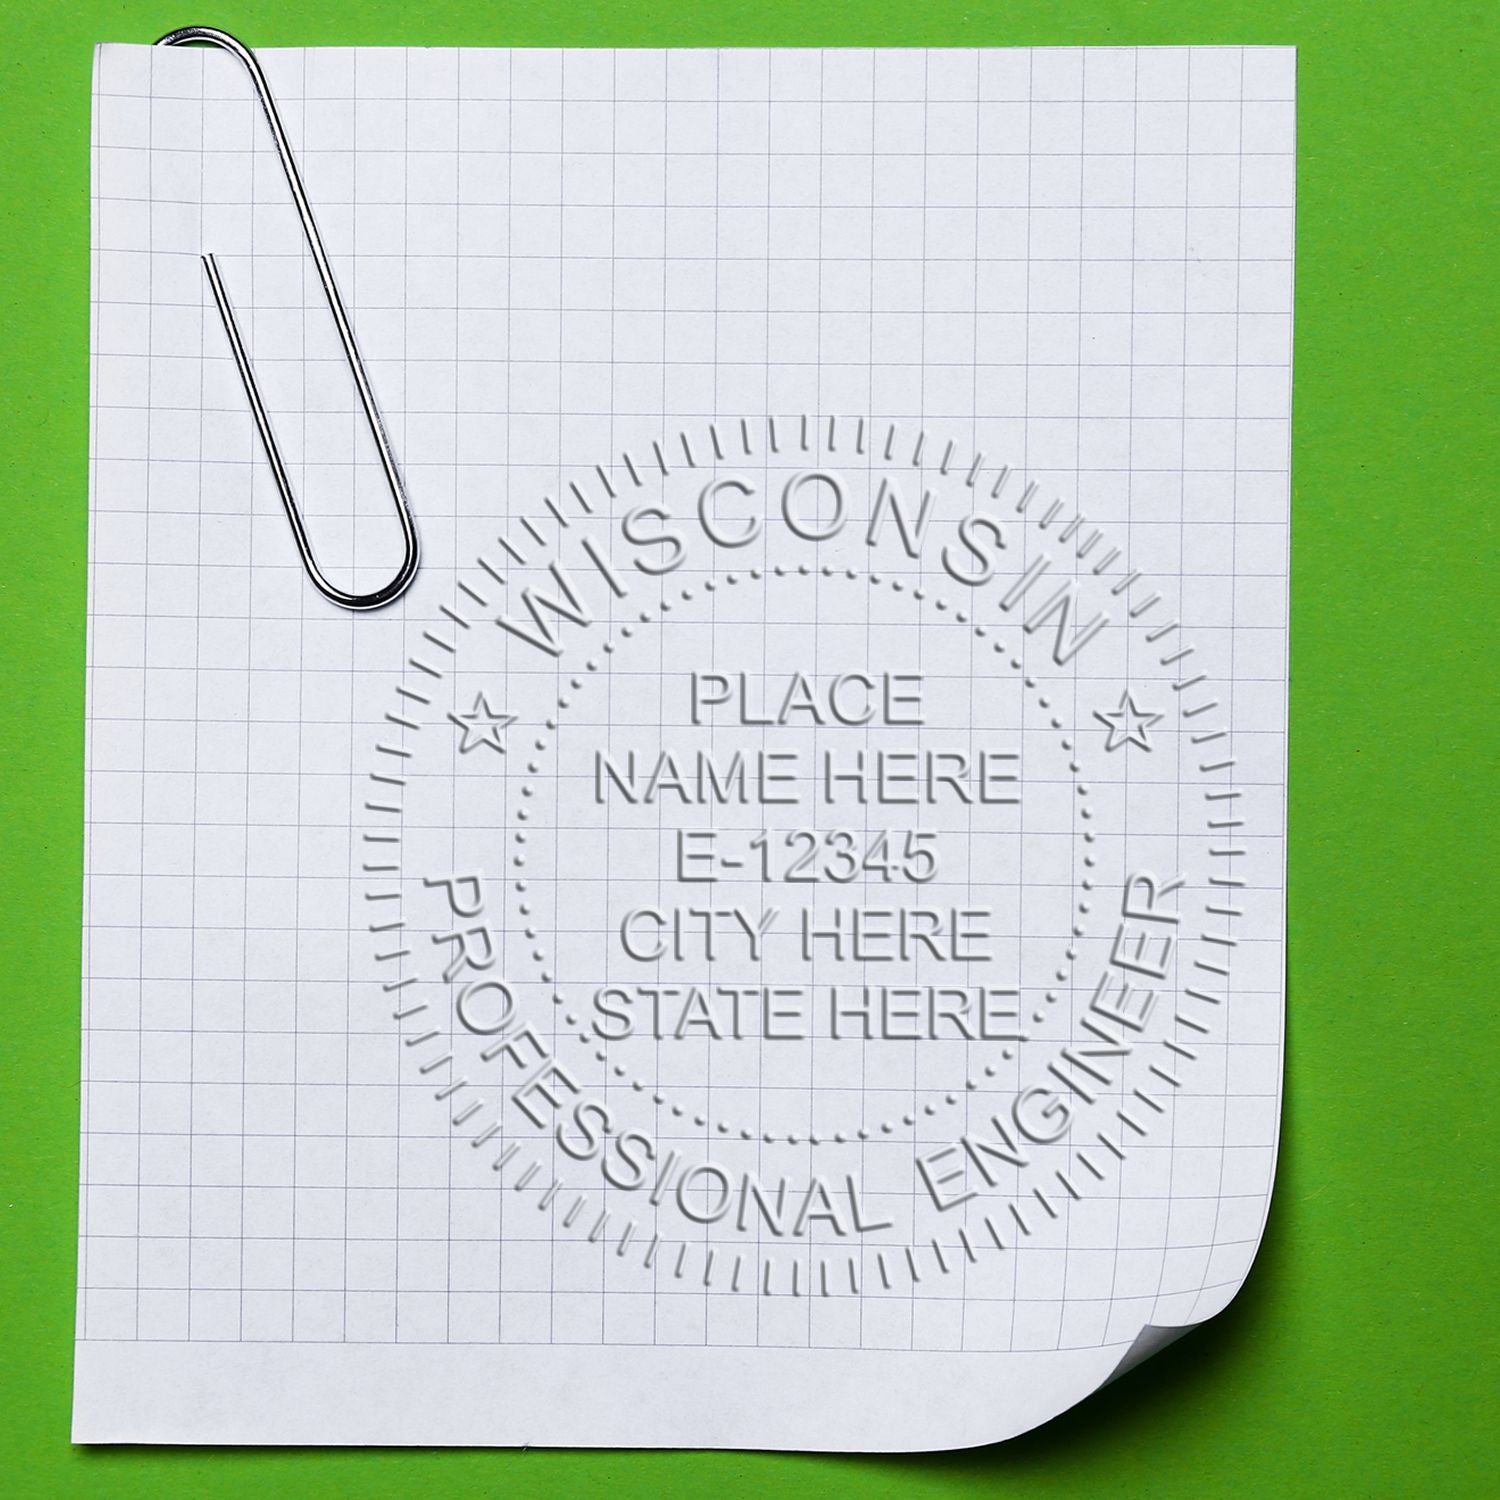 An alternative view of the Long Reach Wisconsin PE Seal stamped on a sheet of paper showing the image in use